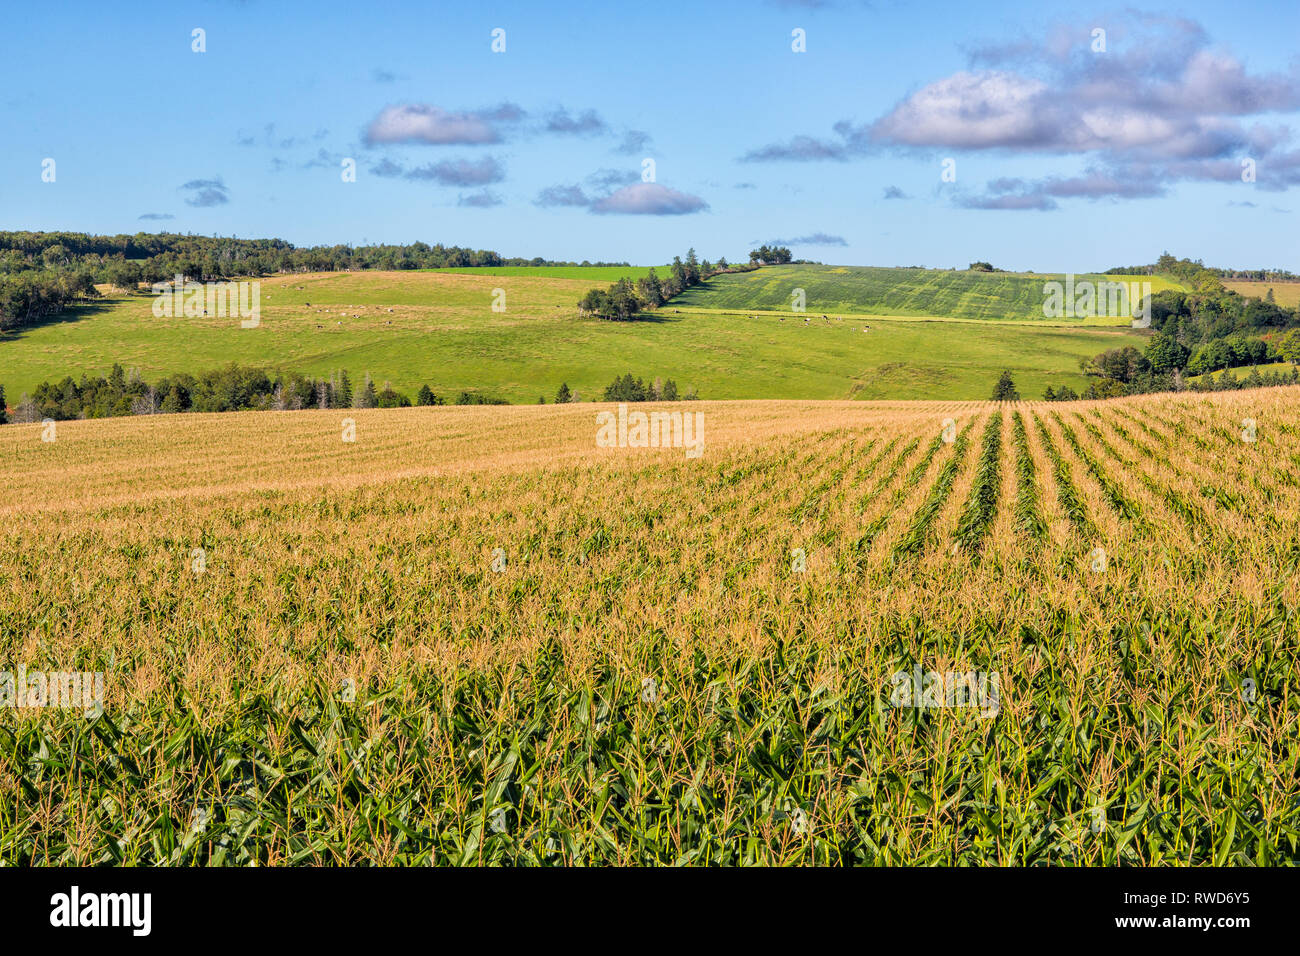 Cornfield, Glen Valley, Prince Edward Island, Canada Banque D'Images